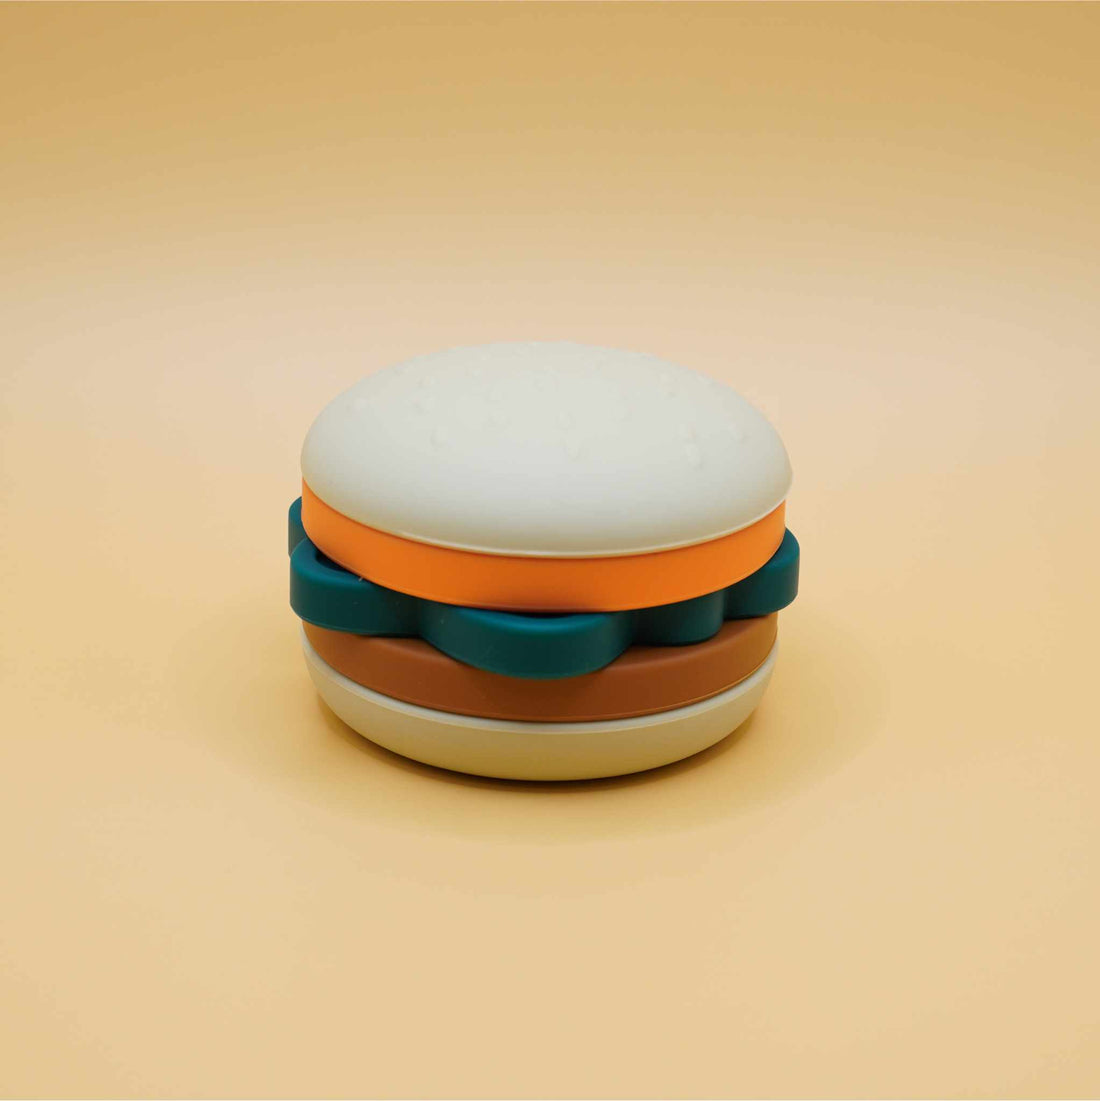 Hearty Hamburger Silicone Stacking toy put together